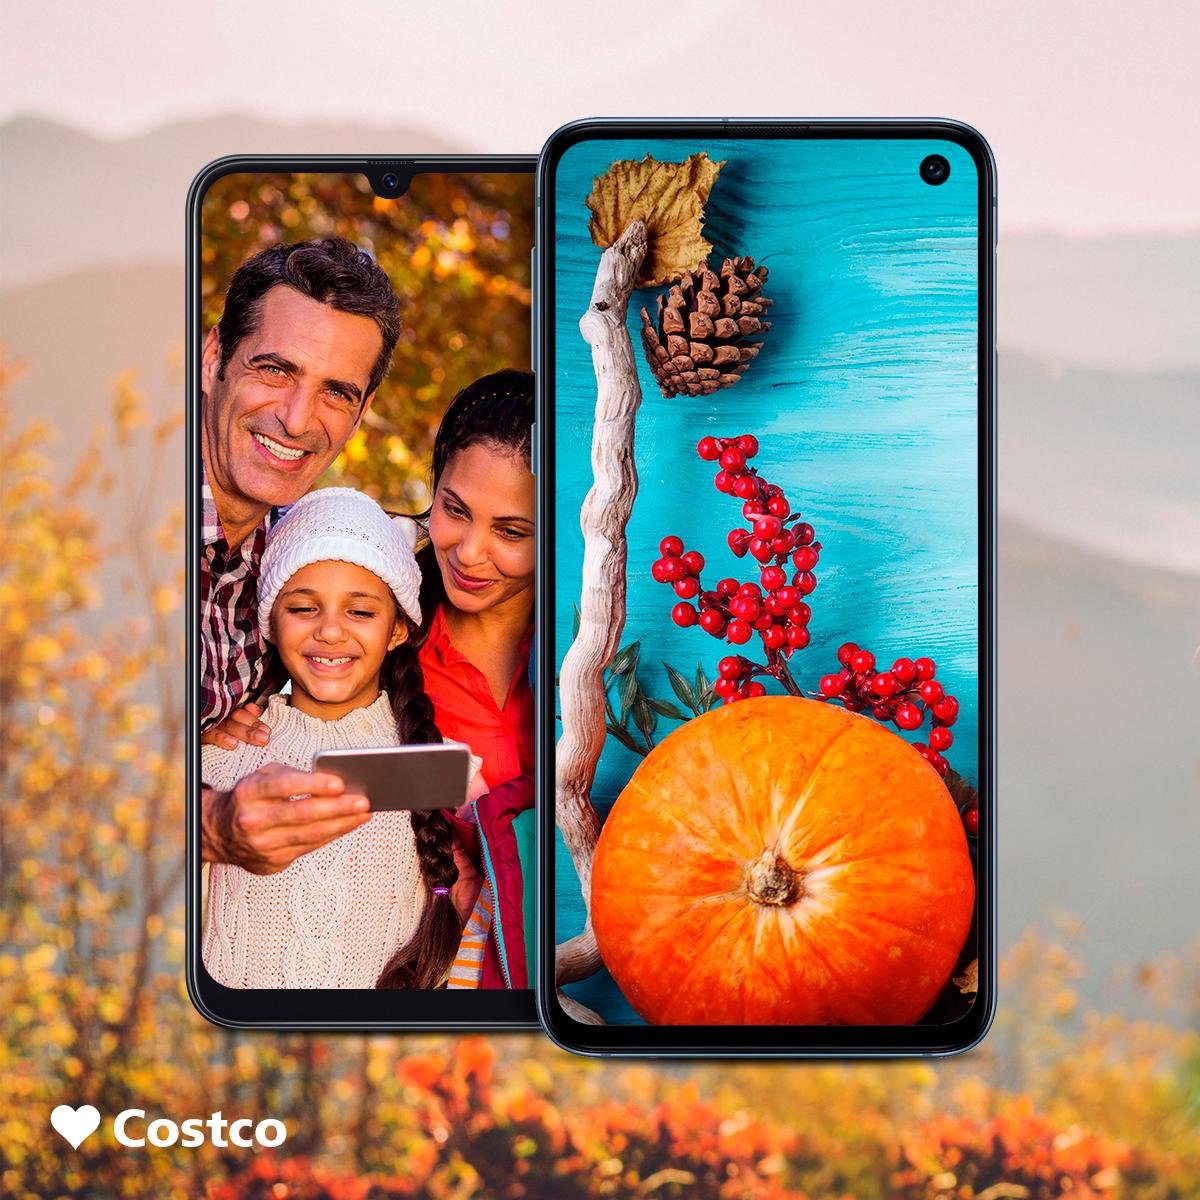 October Smartphone Savings! Costco members receive up to $150 in Costco Shop Cards* bit.ly/2M3JMFy